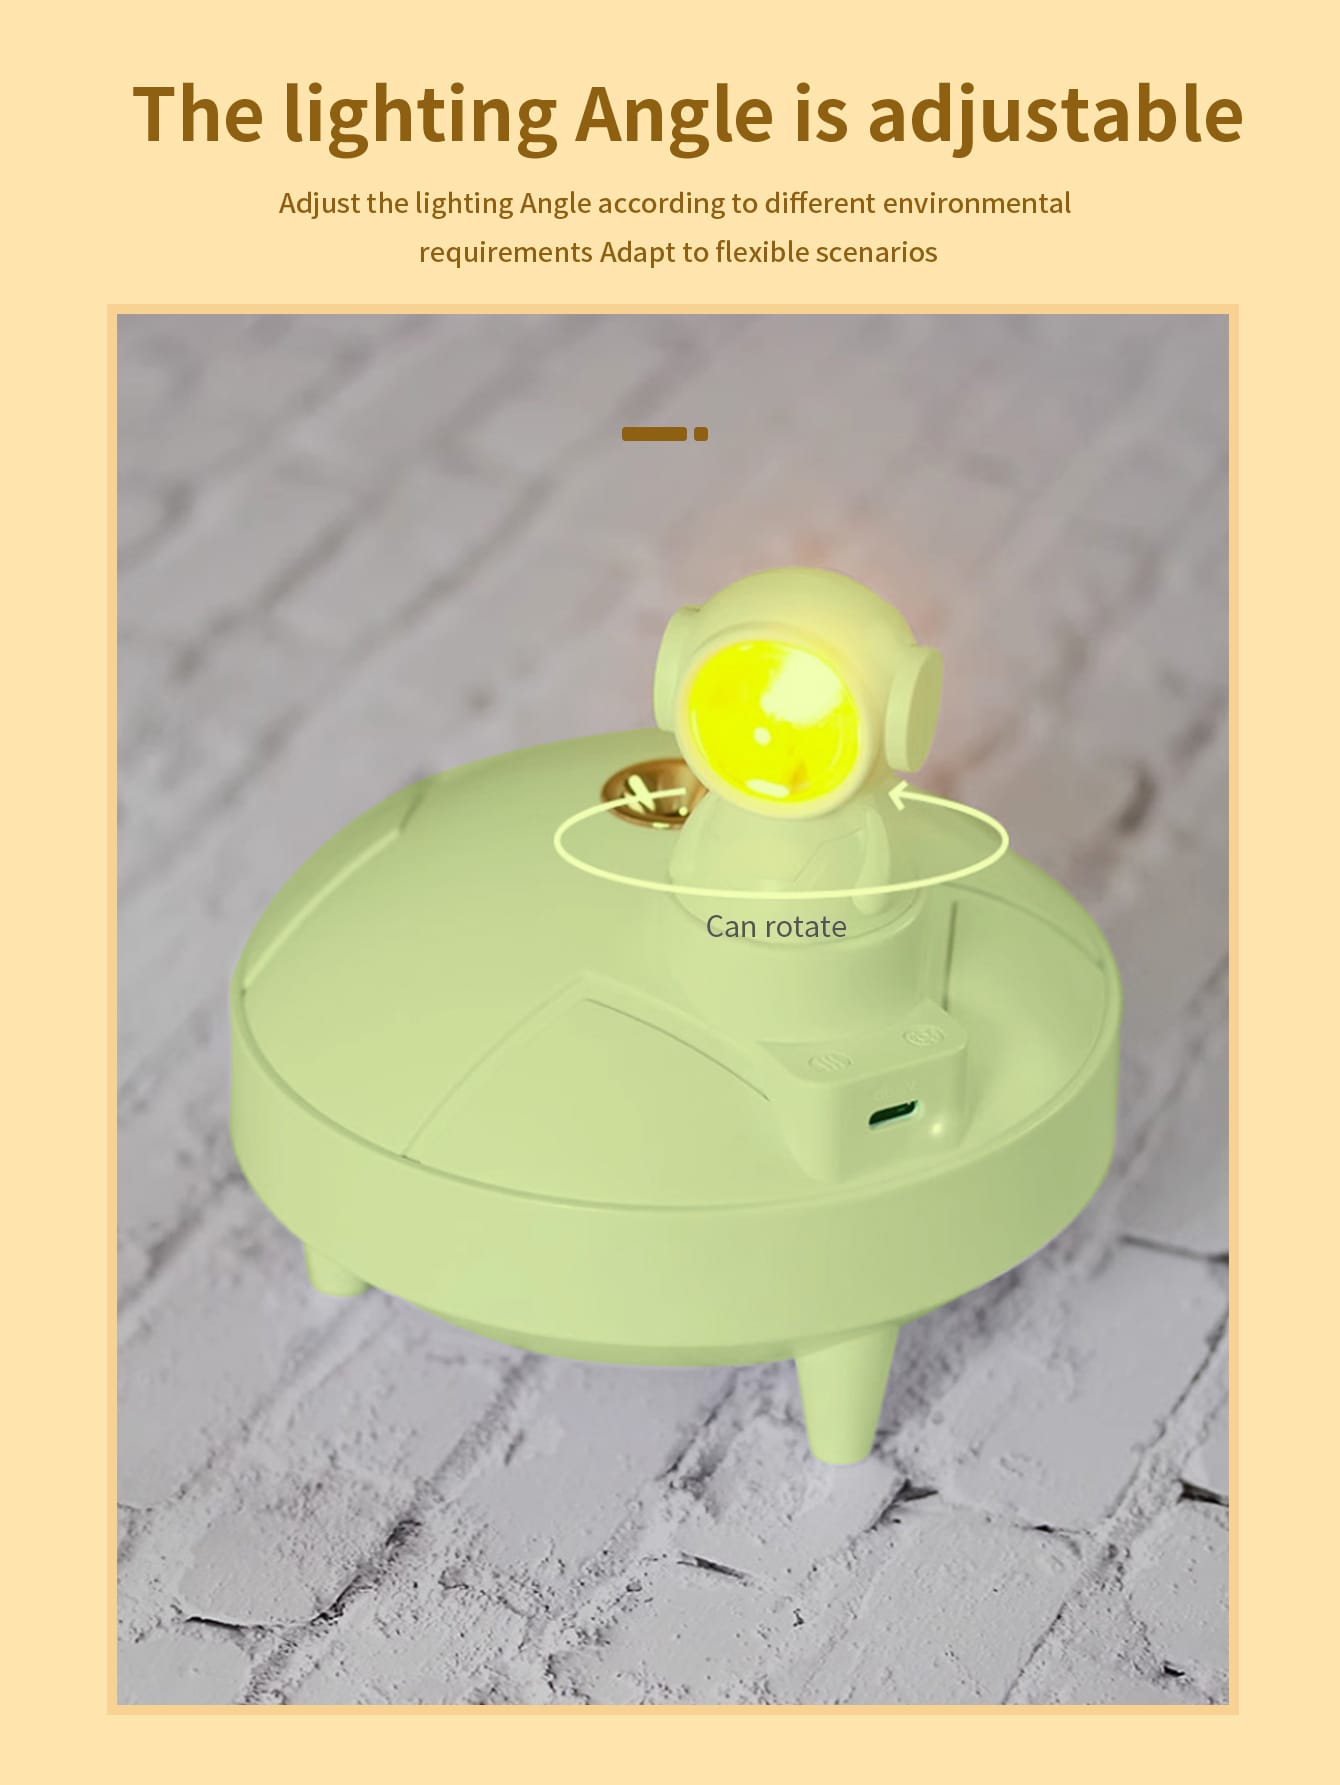 1PC Air Humidifier 290ML Cute Astronaut Space Capsule USB Rechargeable Purifier For Home Office Use Sunset Light Desktop Mist Maker Machine Aromatherapy Water Diffuser-Green-4